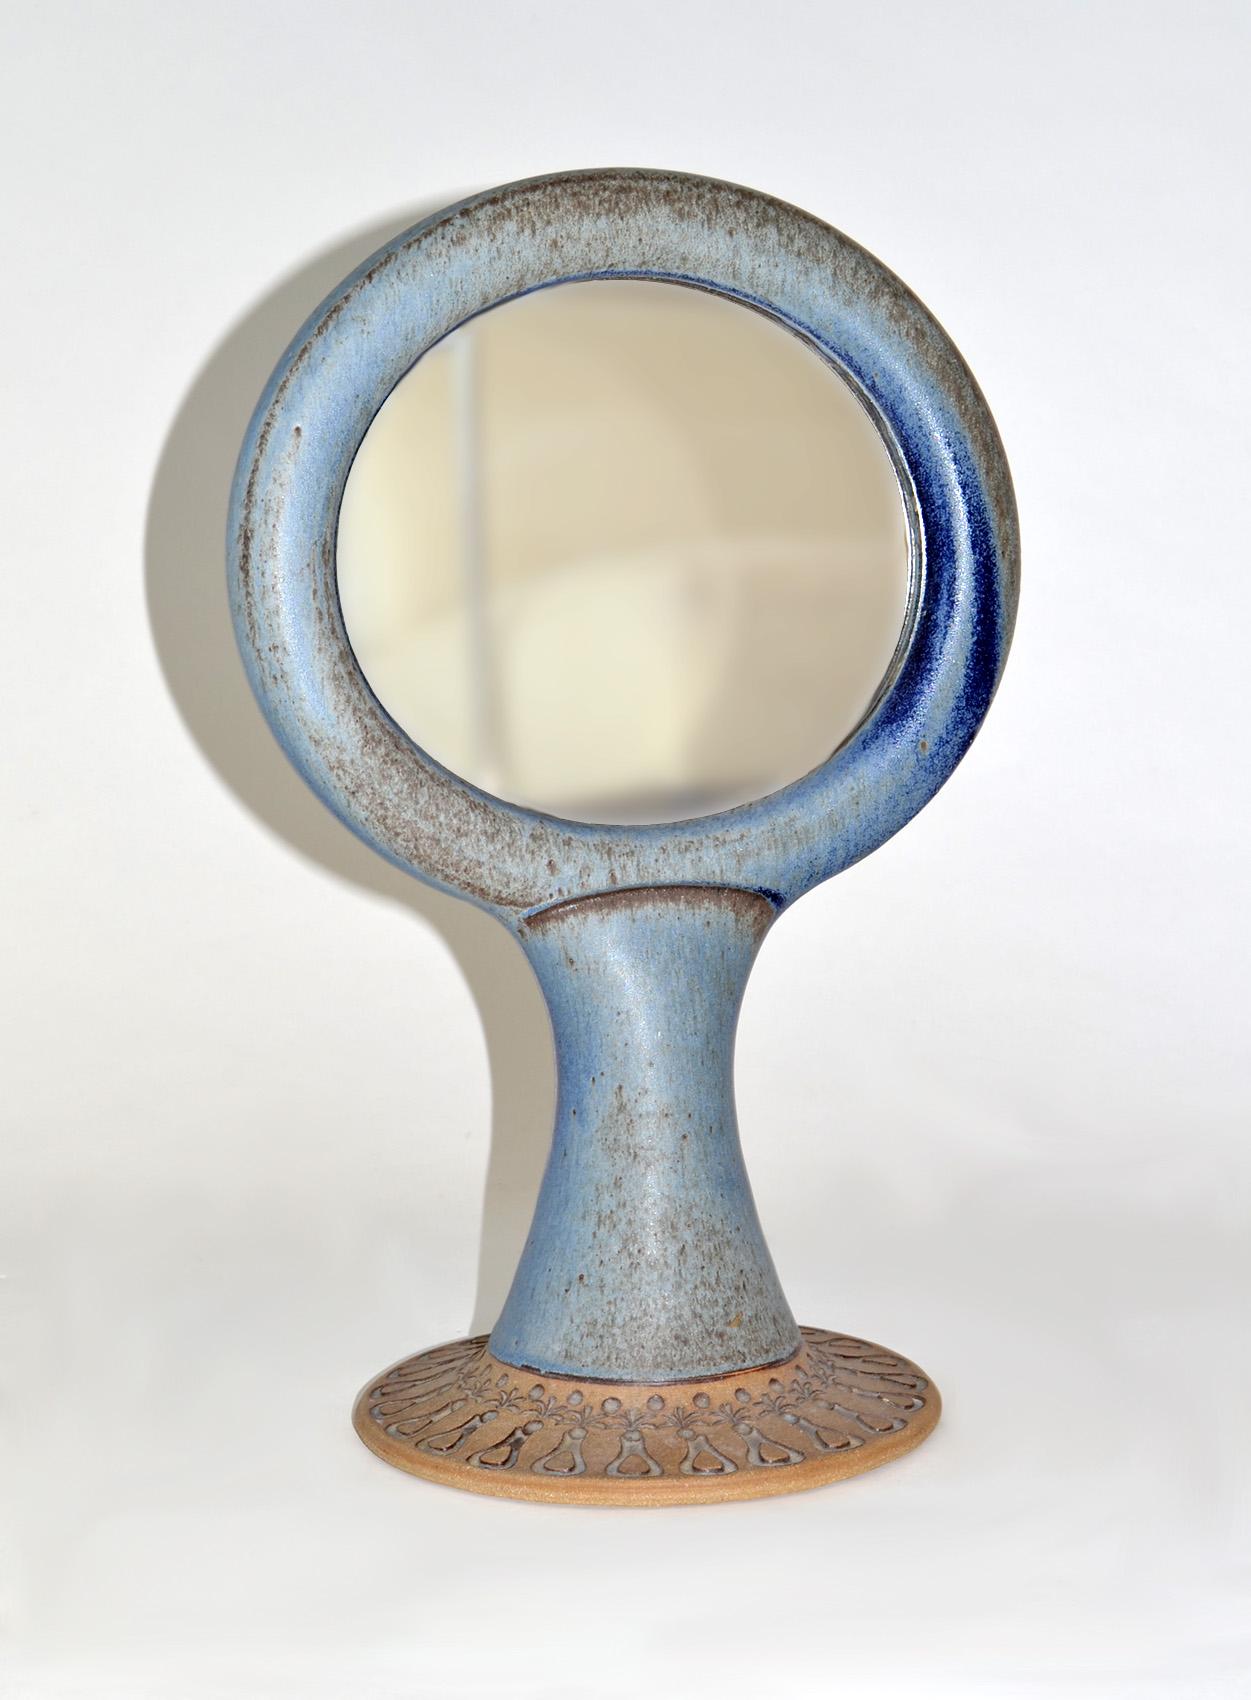 Unique Studio pottery glazed ceramic two sided vanity or table mirror 1960s.
Beautiful blue and brown Swedish-style glazing and incising. Repeating organic design to base. In the style of Stig Carlsson or Gunnar Nylund. 
Possibly a unique example.